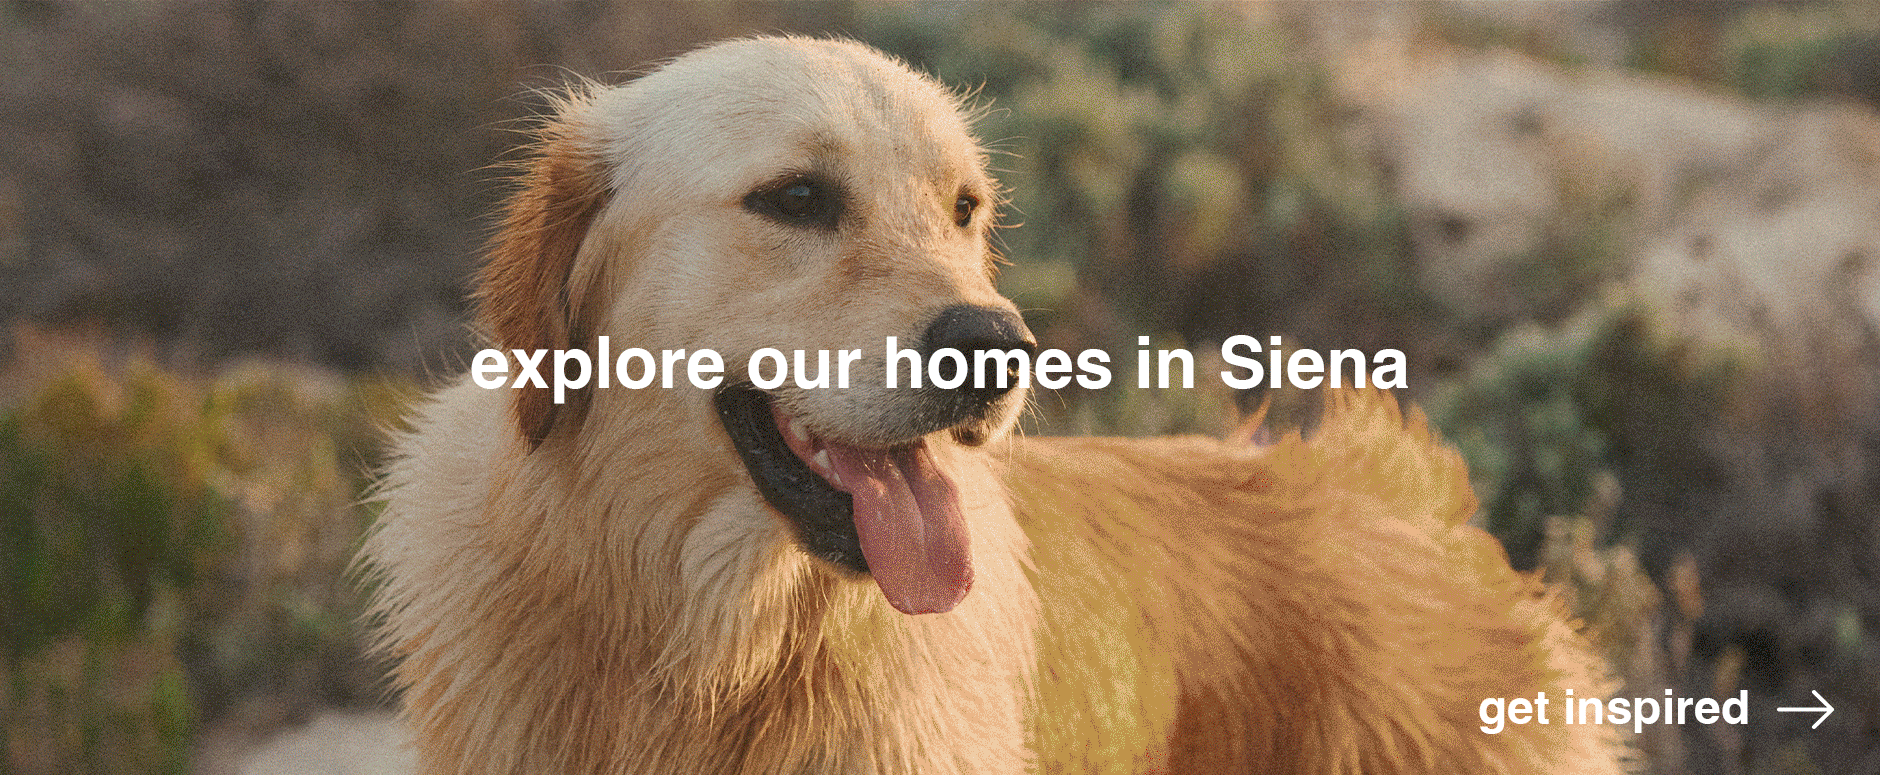 Explore our homes in Siena 